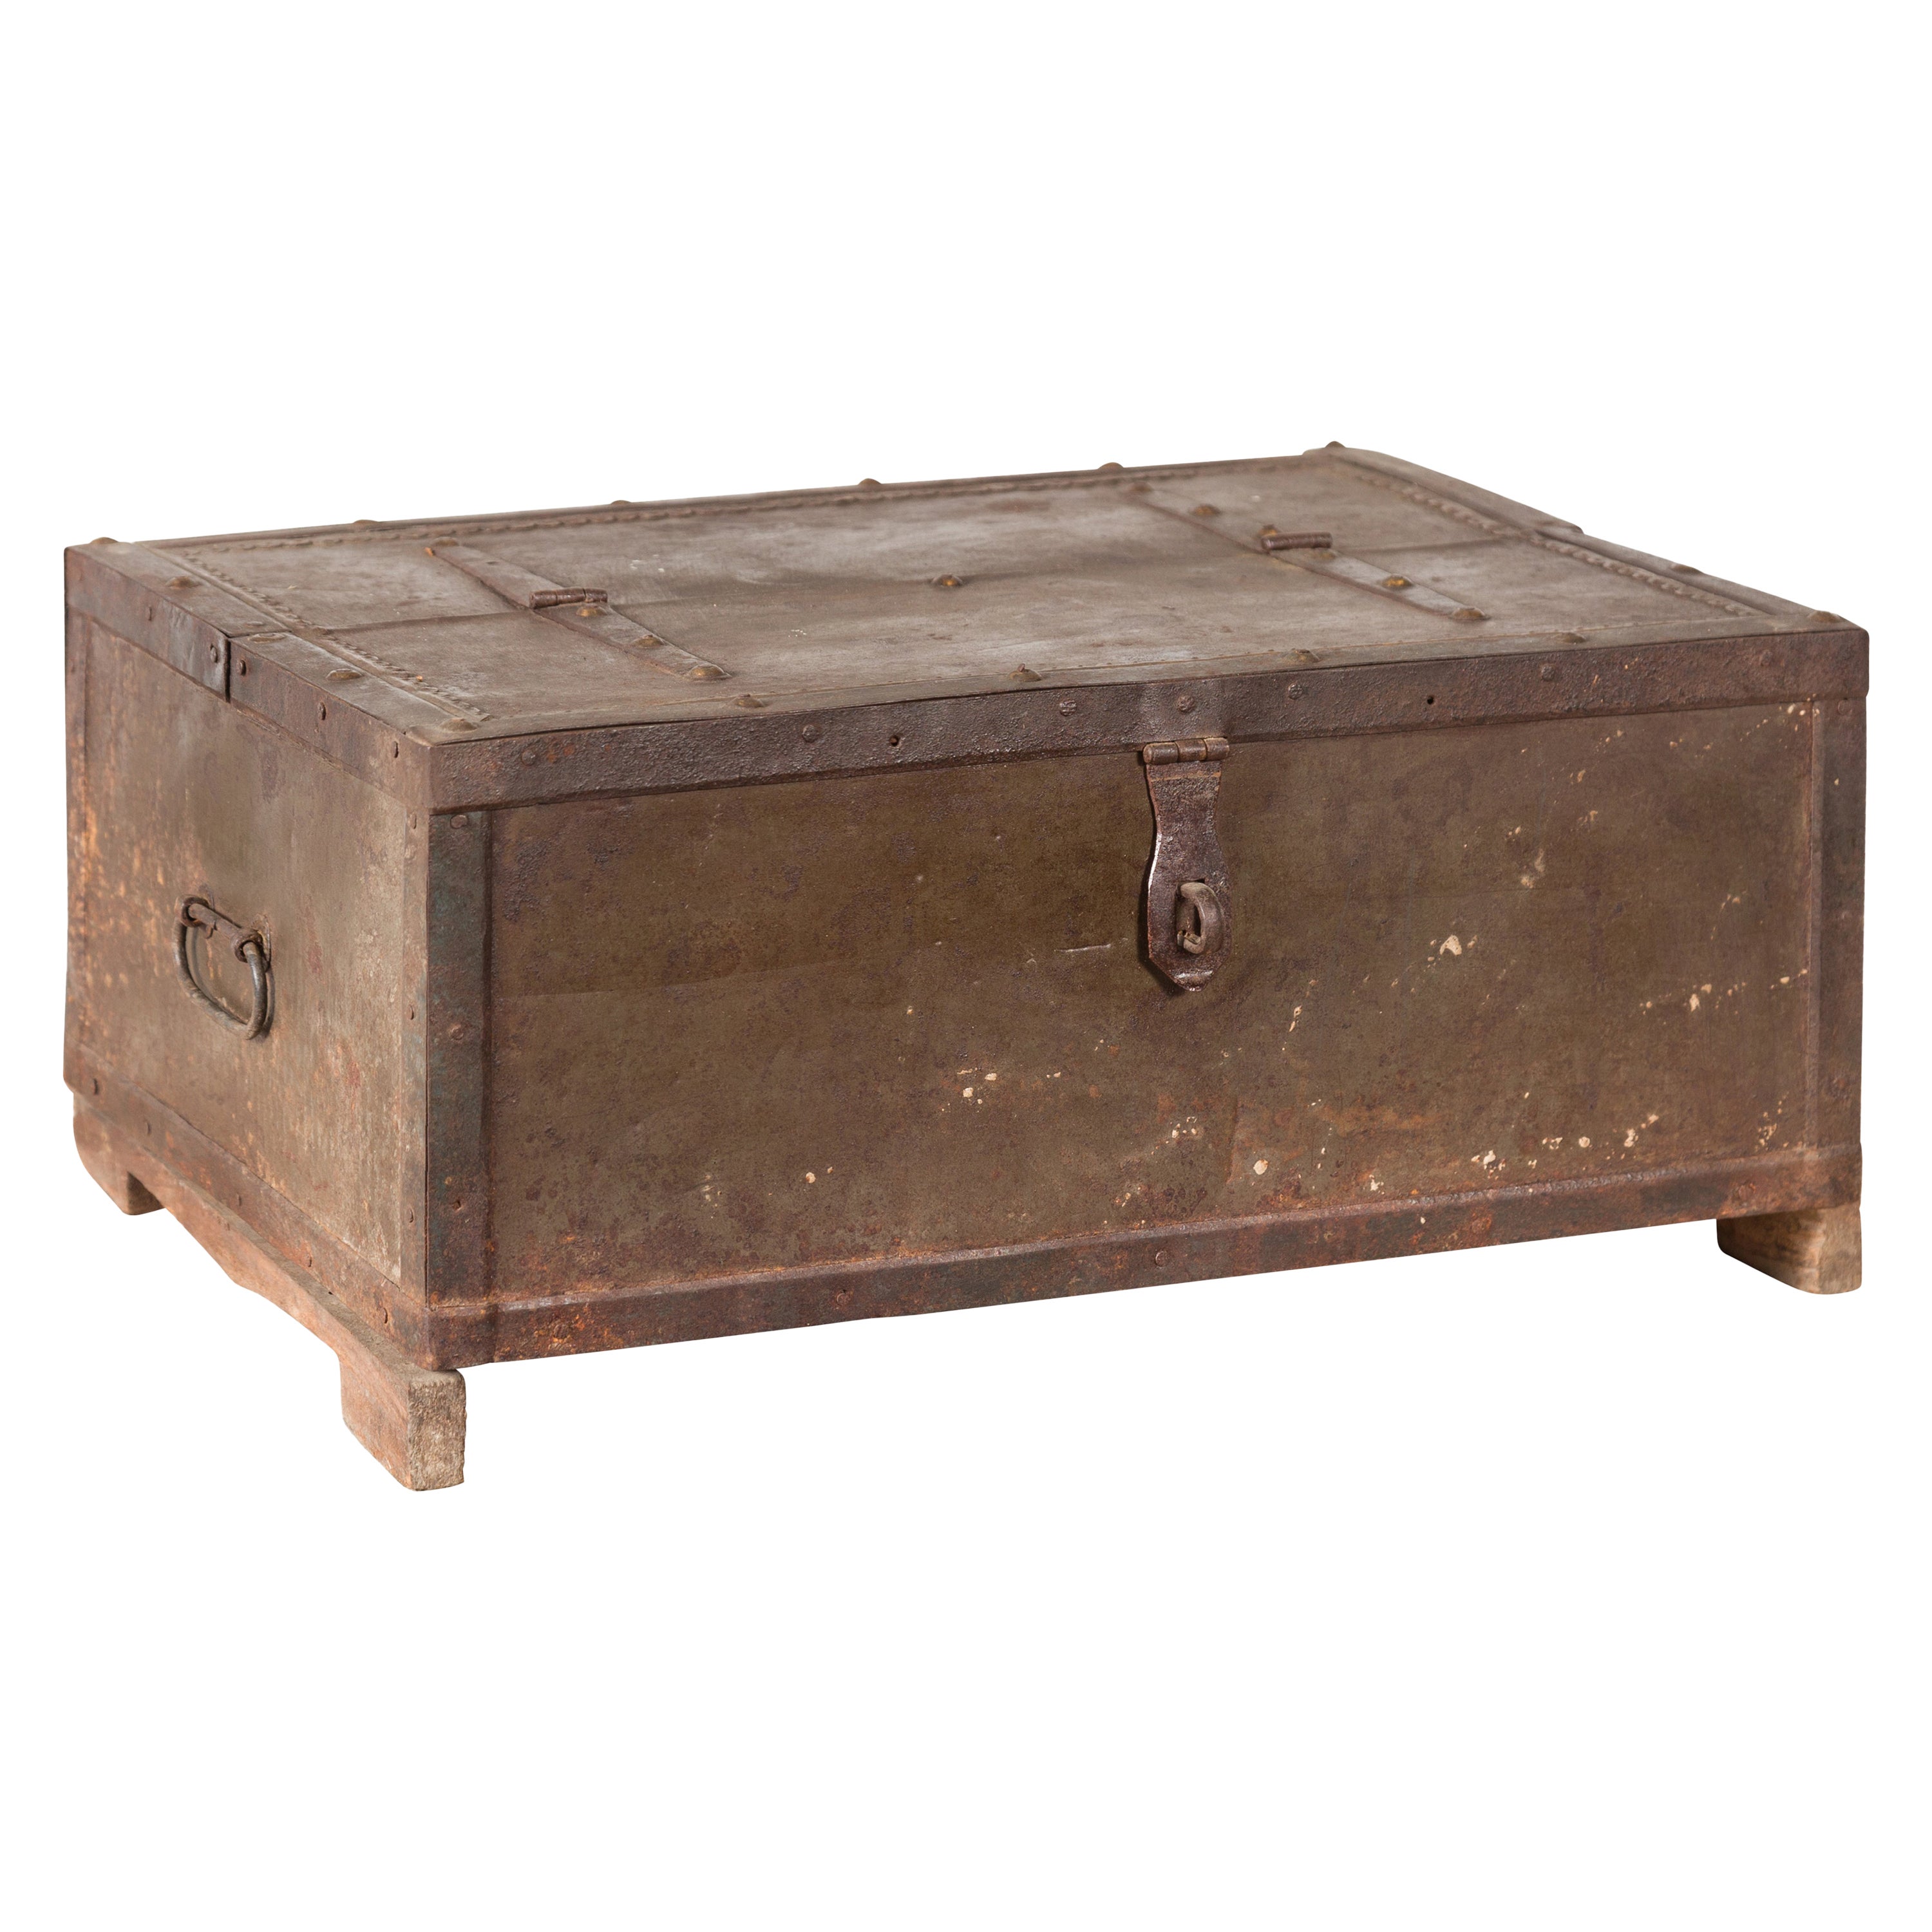 Indian 19th Century Box with Metal Sheathing and Bracketed Wooden Base